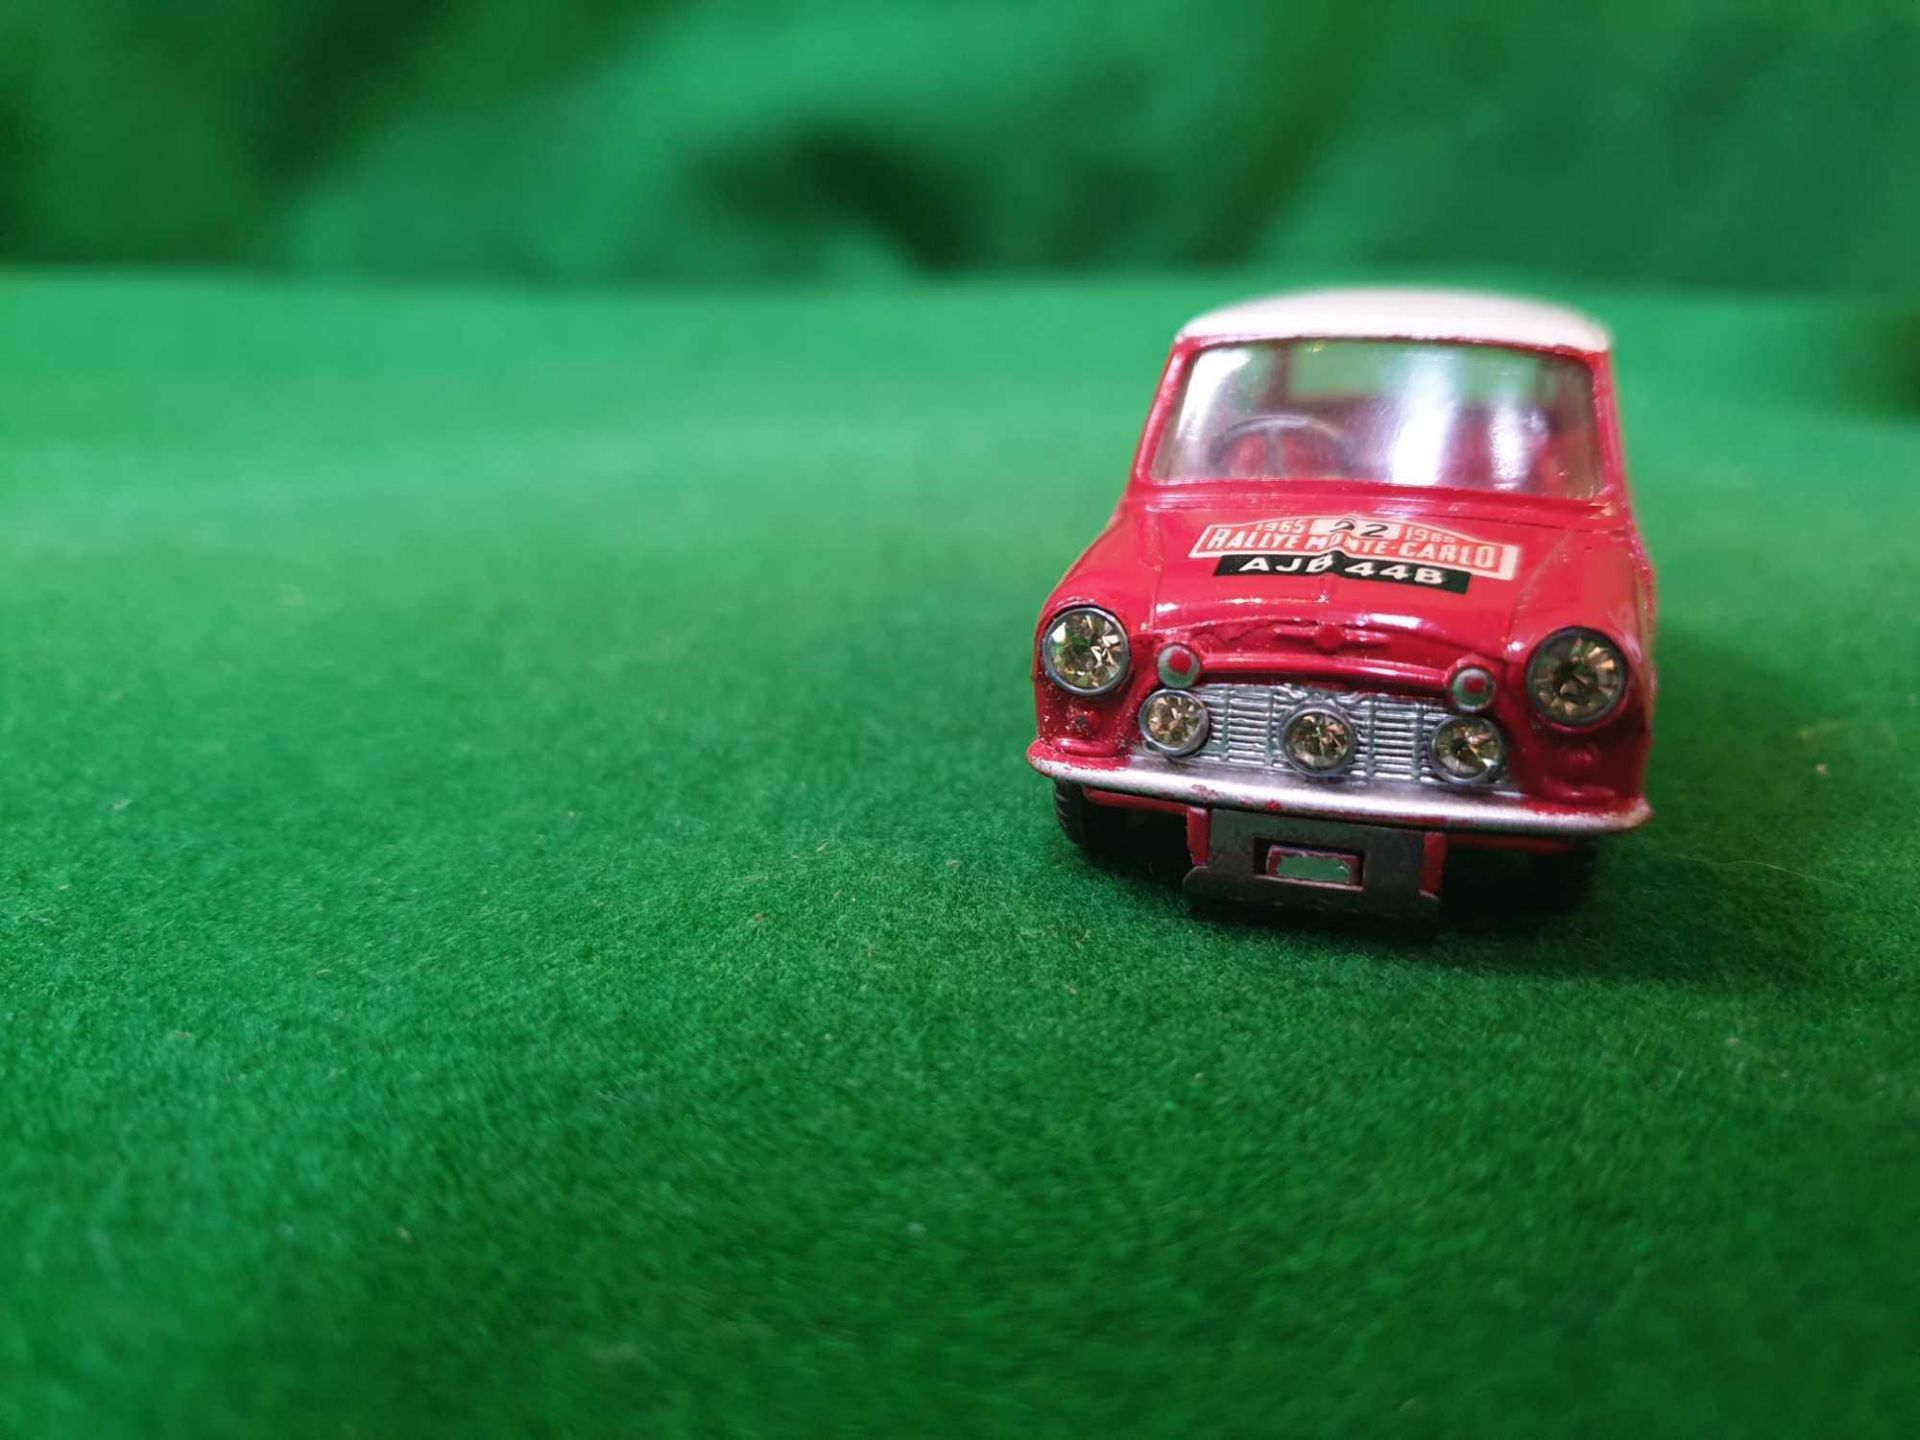 Corgi #321 BMC Monte Carlo Mini Cooper Red Body White Roof No 52 Decal Unboxed In Good Overall - Image 2 of 3